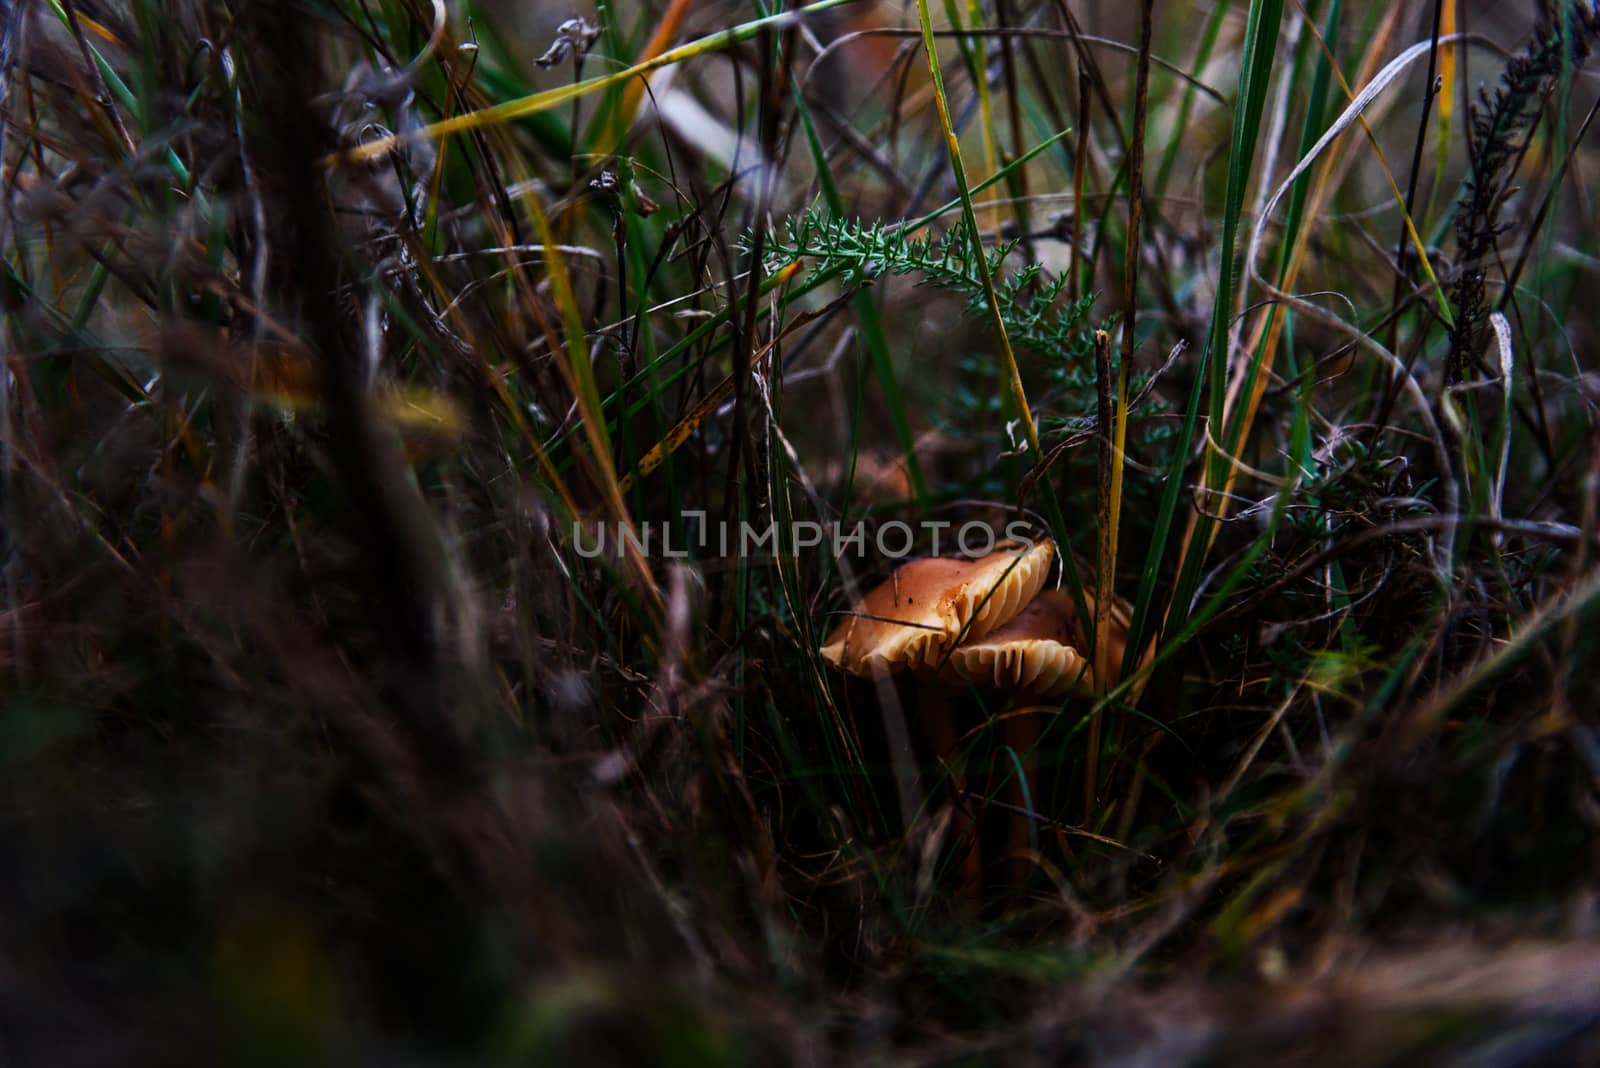 Two little Yellow Mushrooms In The Grass